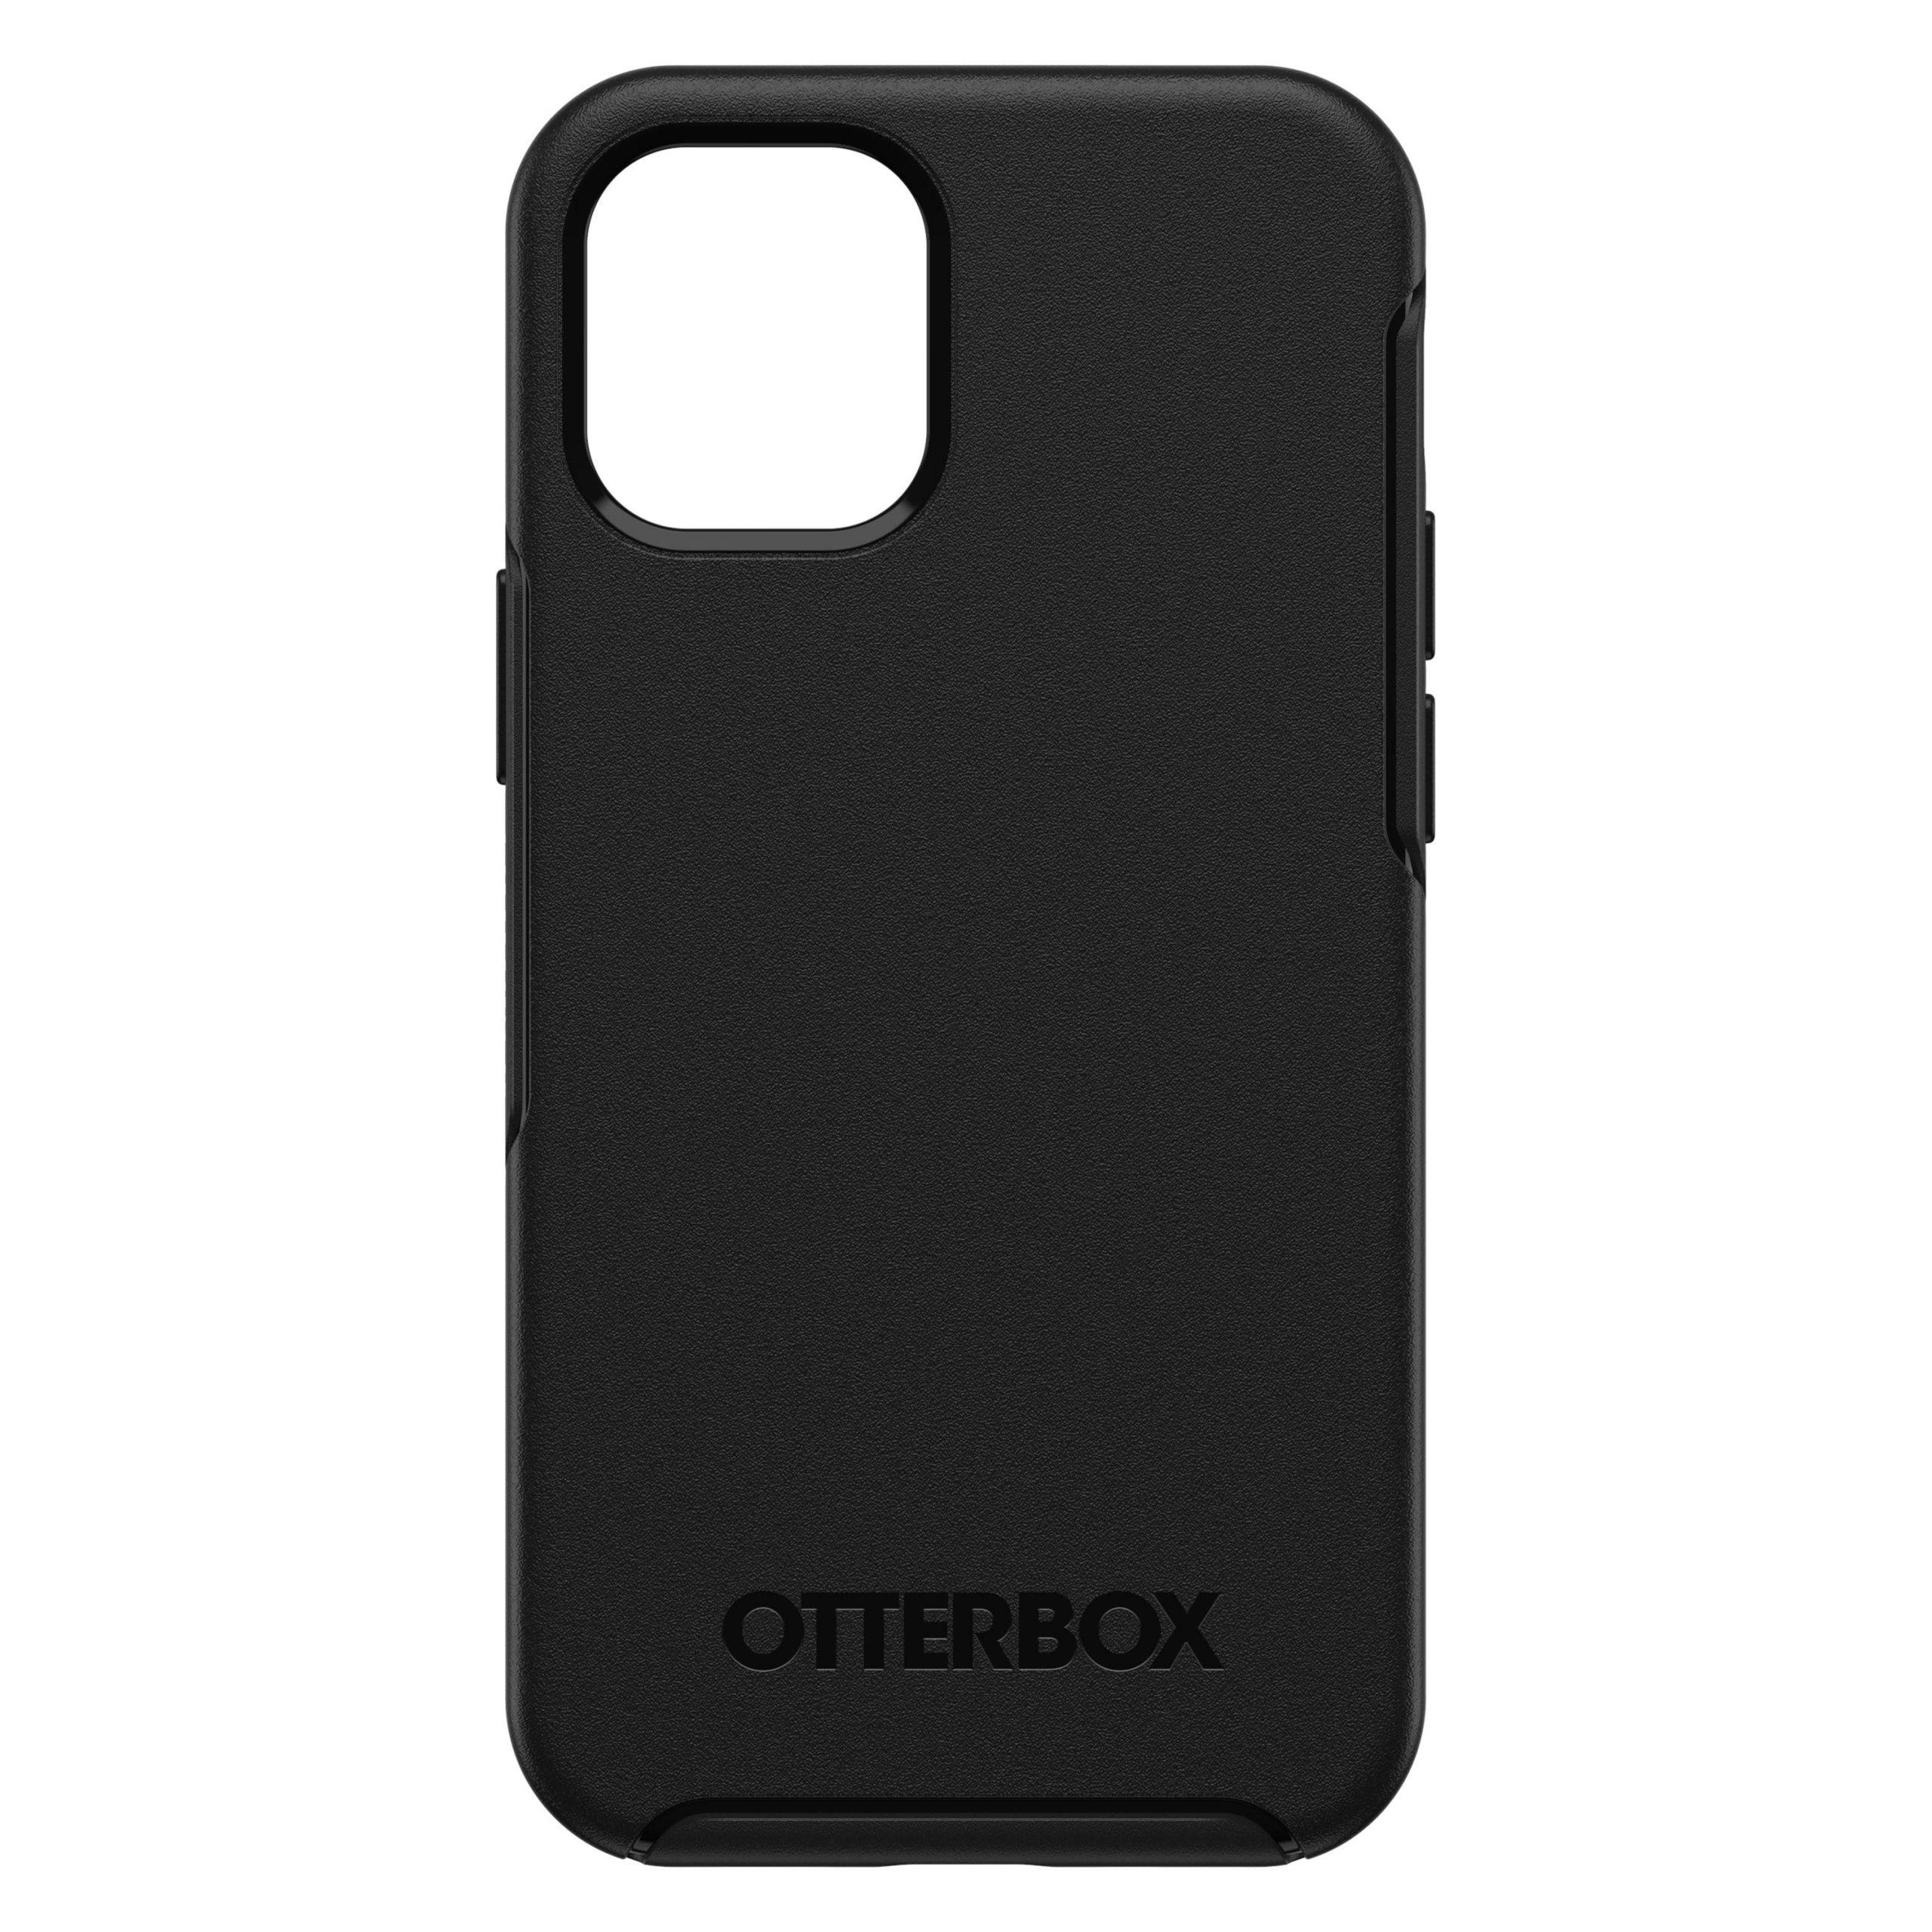 otterbox apple iphone 12 mini symmetry case slim and lightweight cover w anti microbial and military grade drop protection wireless charging compatible black